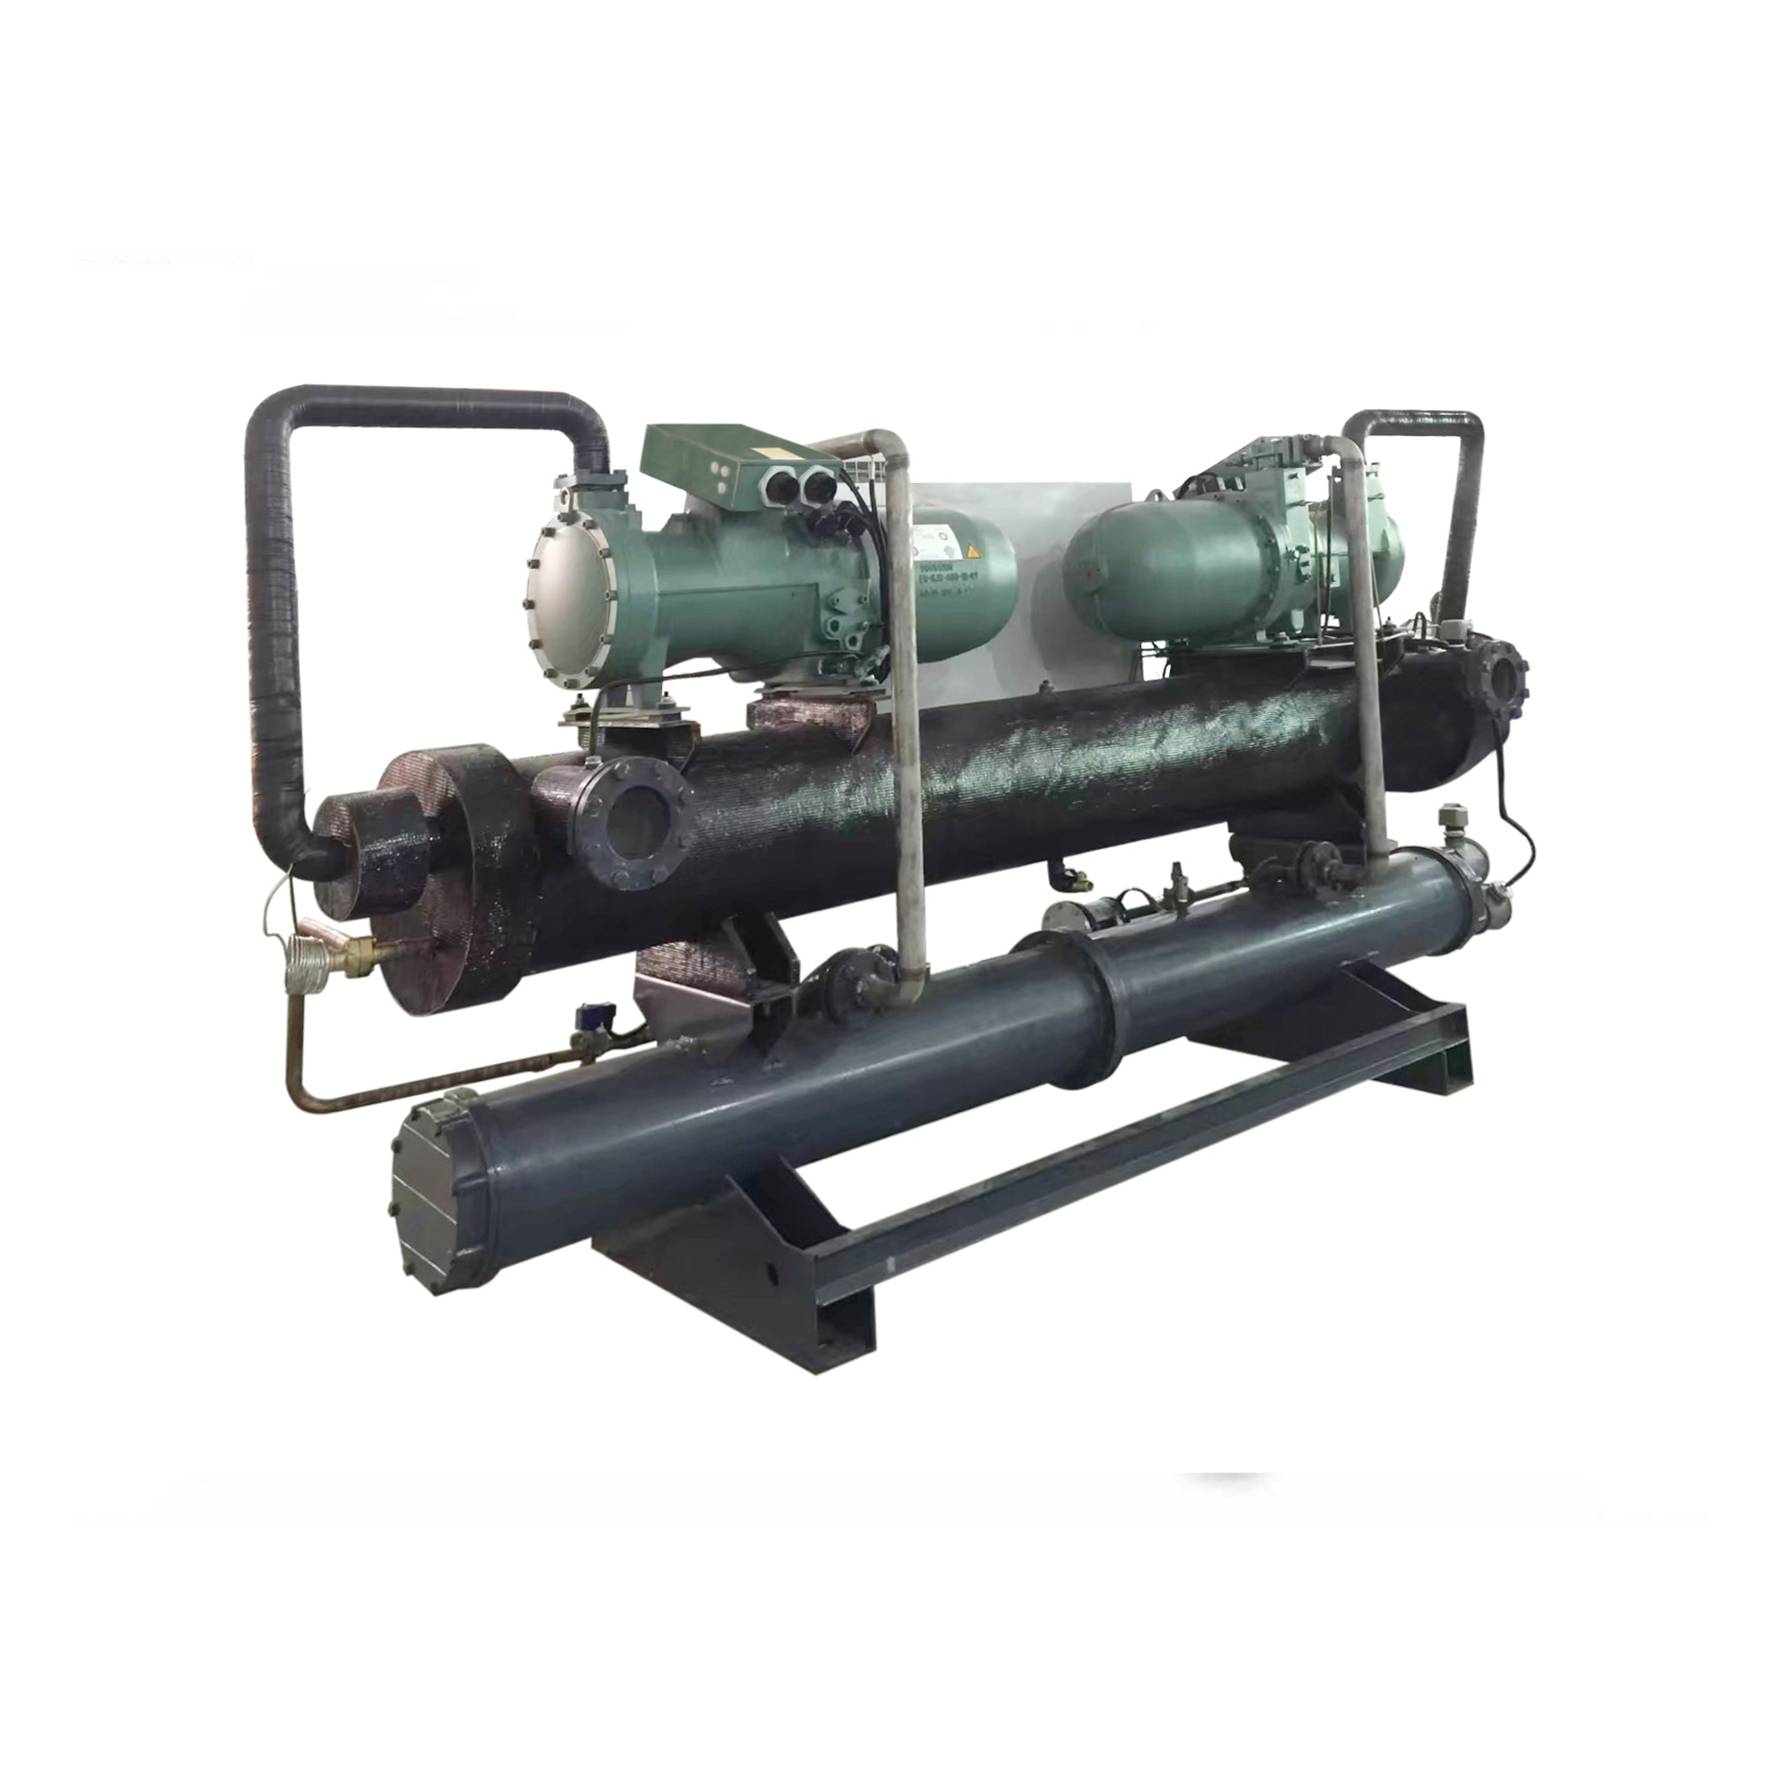 China Water Cooled Screw Type Chiller Manufacturer And Supplier Hero Tech